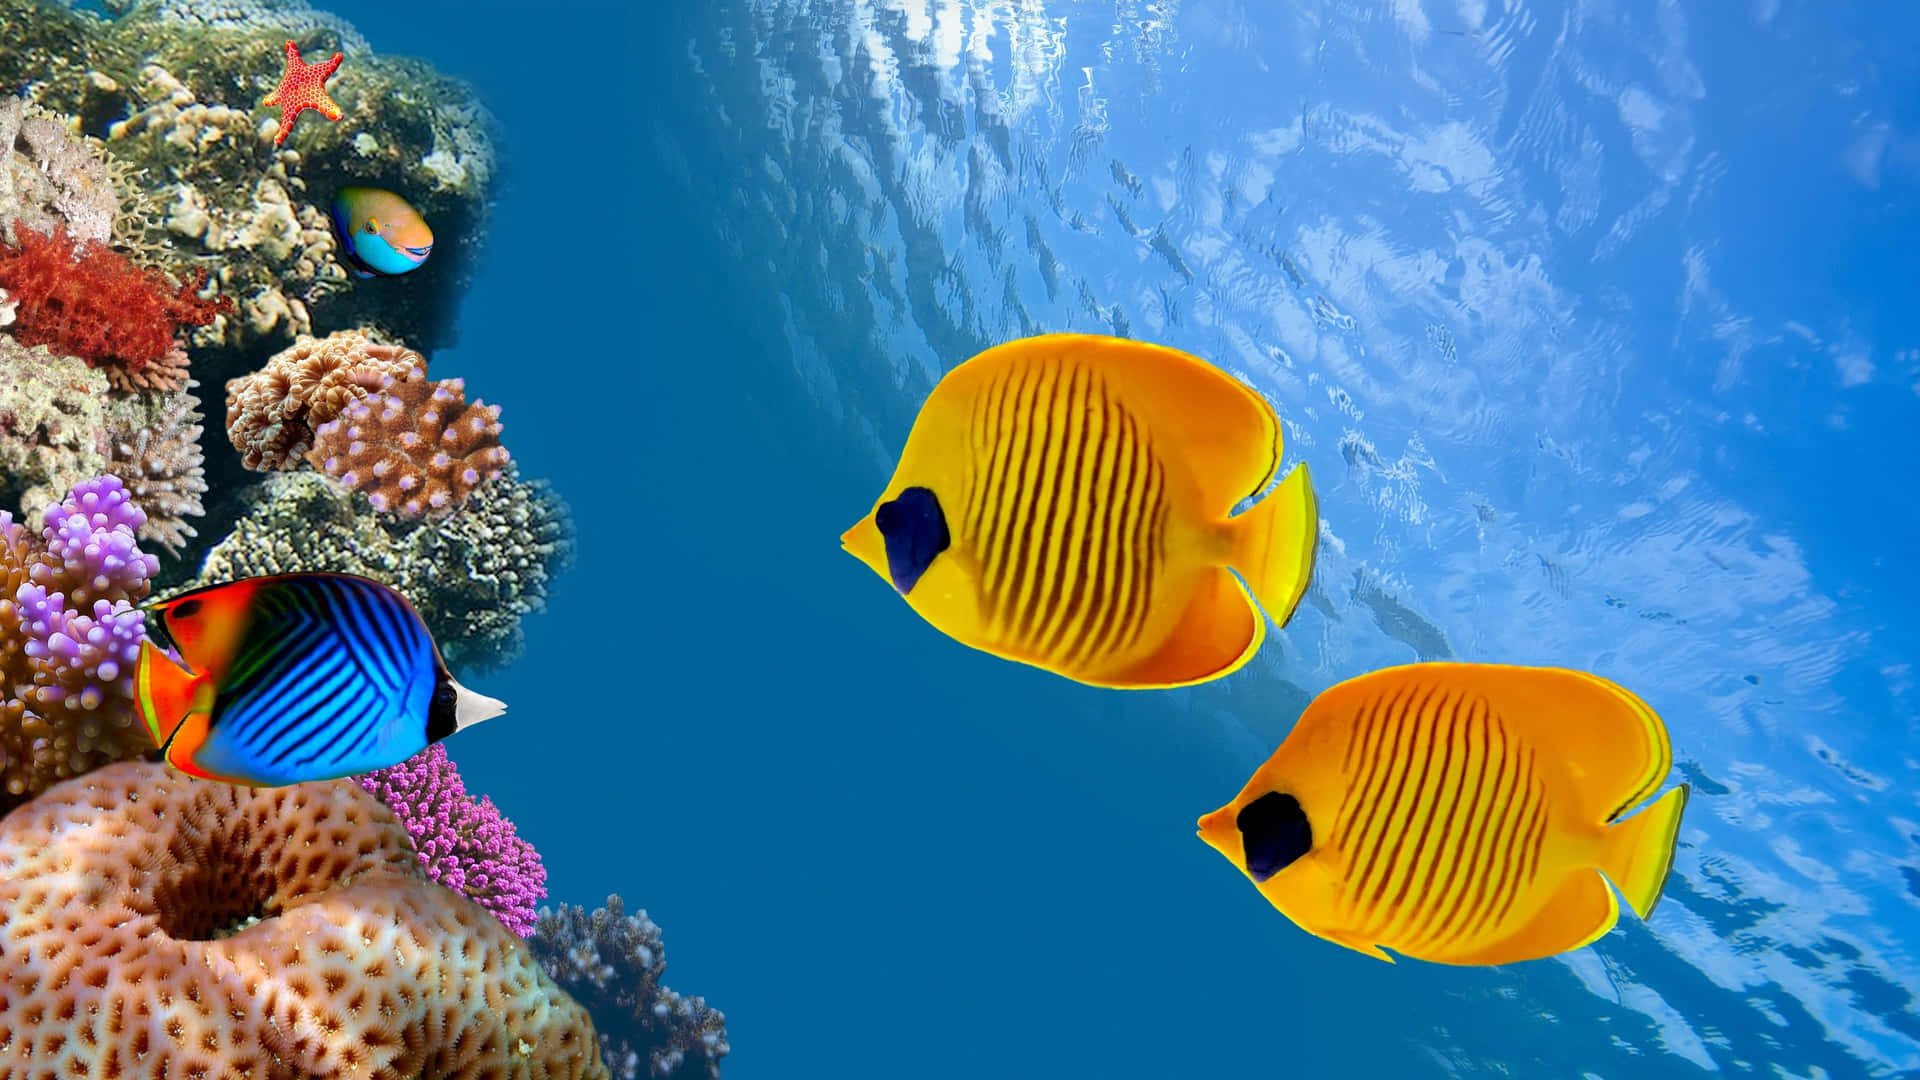 "A school of colorful 4K fish swim through the clear blue ocean." Wallpaper